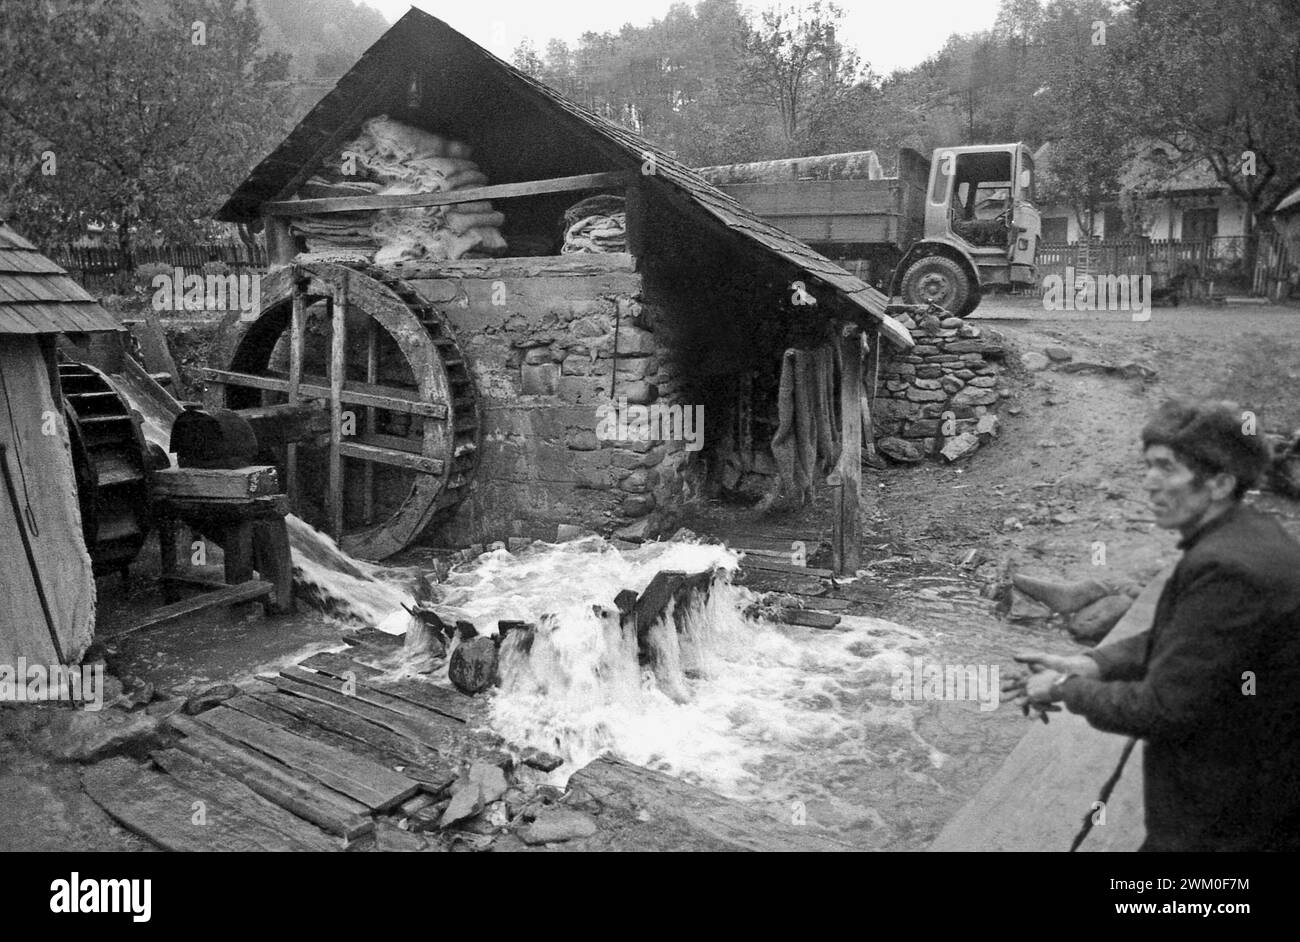 Vrancea County, Romania, 2000. Local water mill, with a wooden washing tub with whirlpool system for cleaning handmade wool blankets. Stock Photo